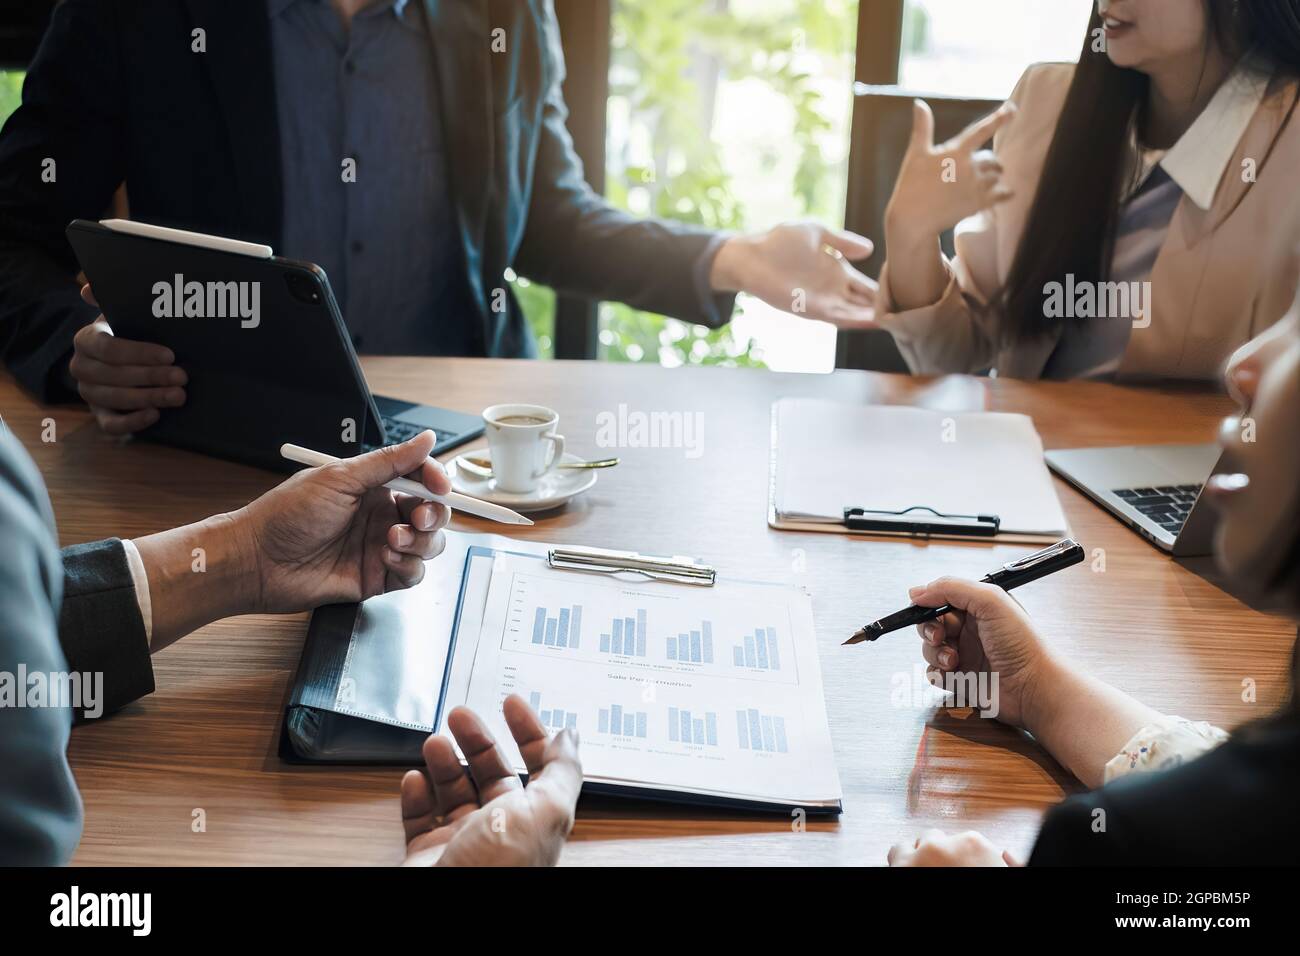 Multiracial business people gather to discuss the company's market plan for the coming year. Teamwork Togetherness Unity Concept. Stock Photo